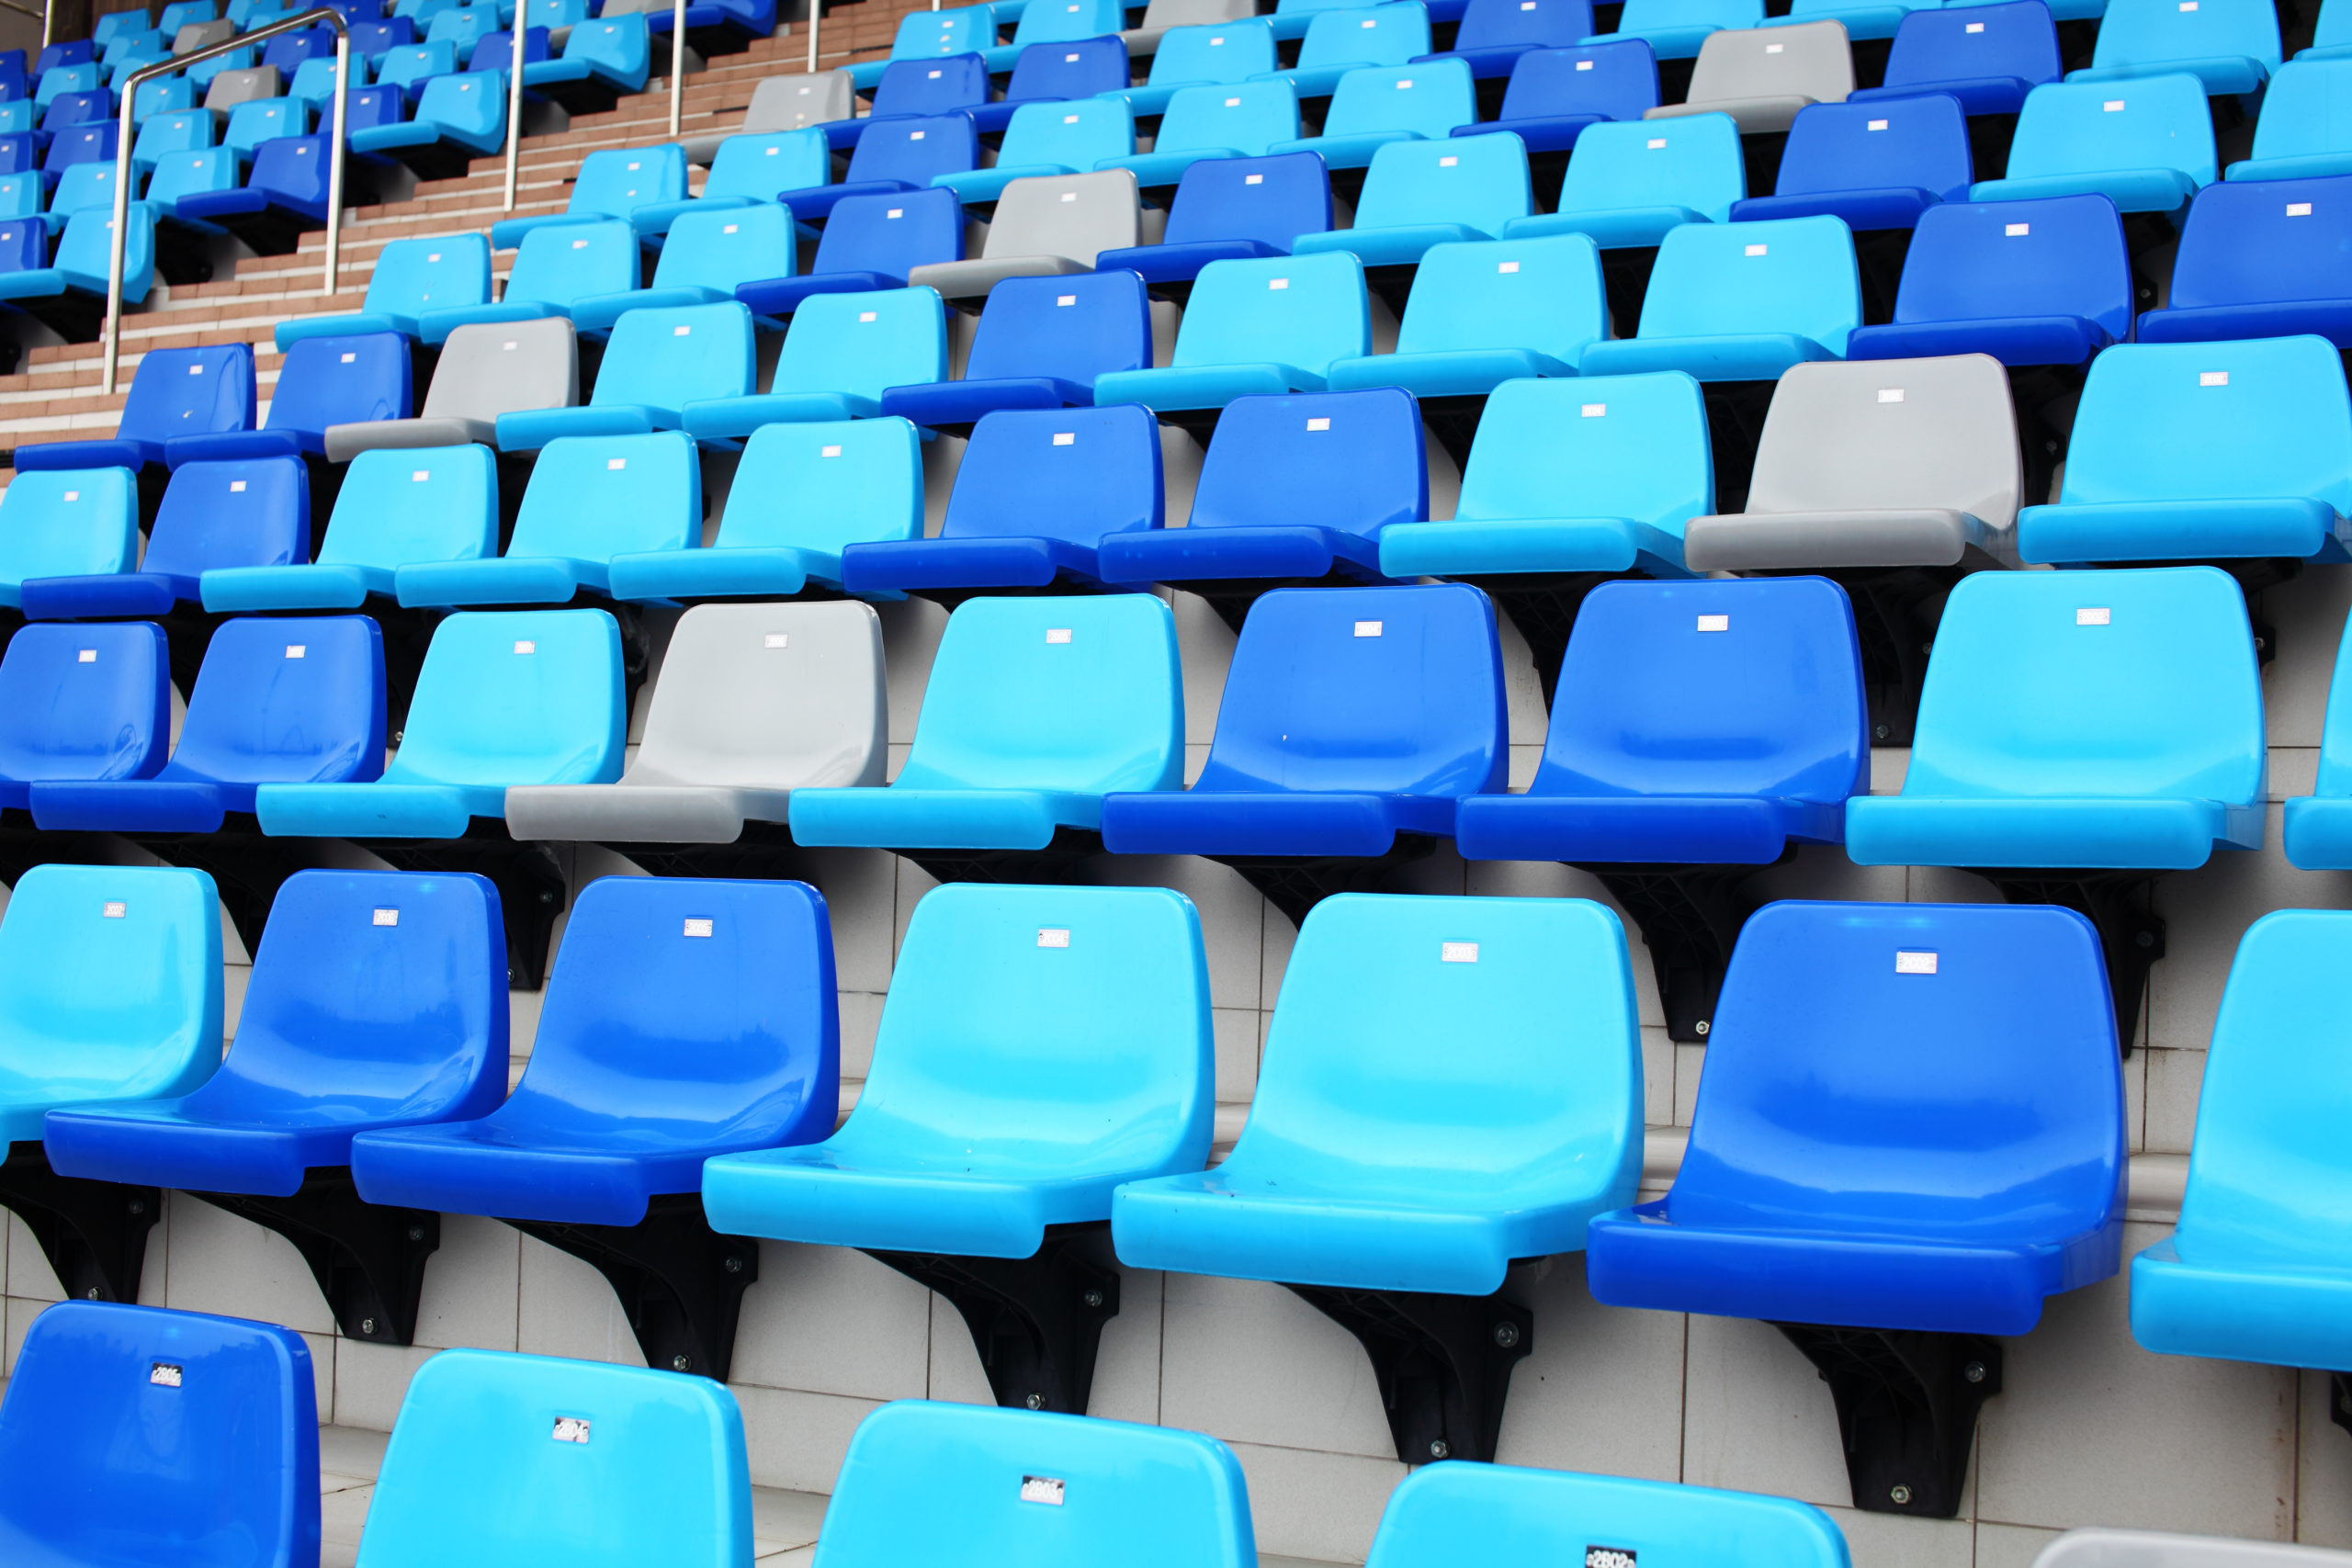 Audience seats in a stadium.